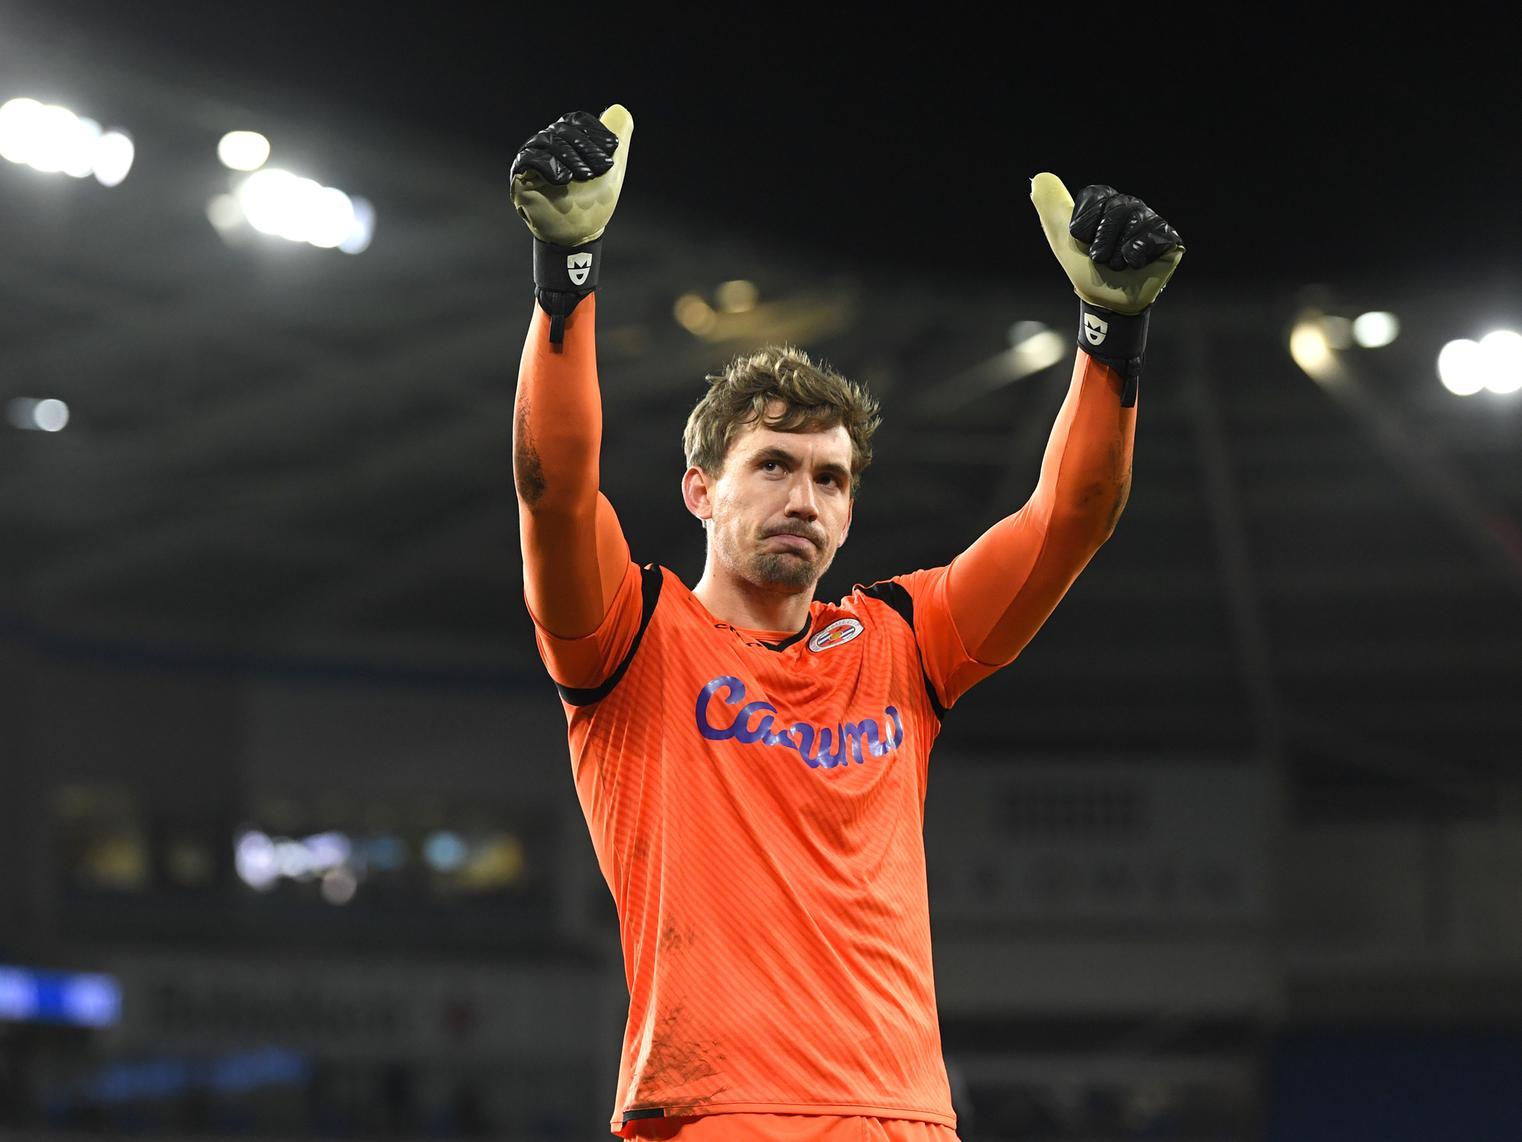 Sam Walker, Reading's penalty shootout hero from their FA Cup fourth round win over Cardiff City, has hinted that he could leave the club in the summer, after struggling for game time this season. (Reading Chronicle)